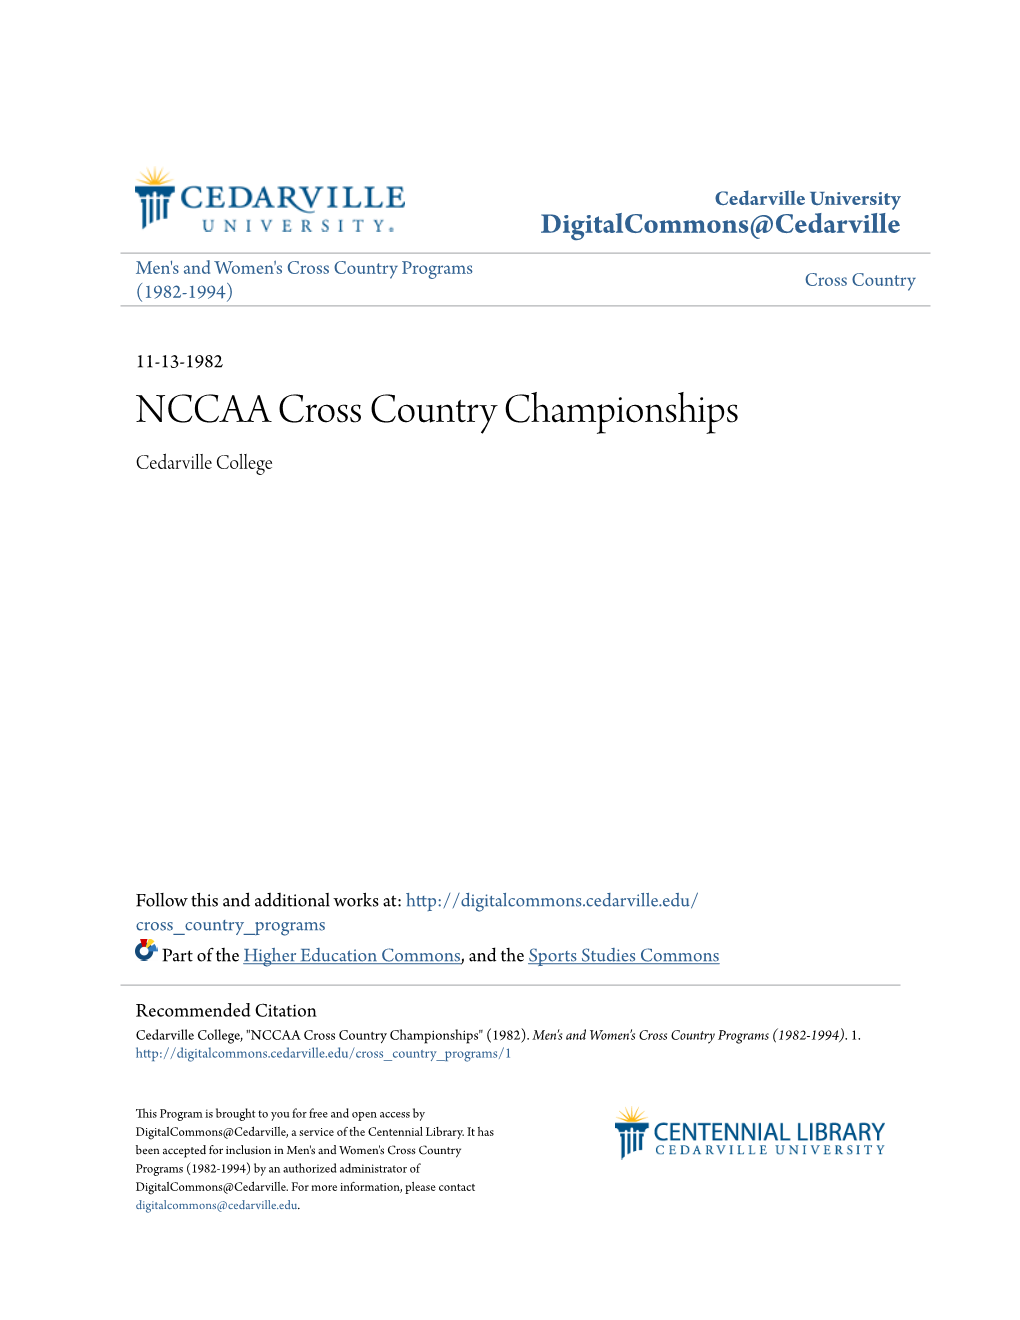 NCCAA Cross Country Championships Cedarville College